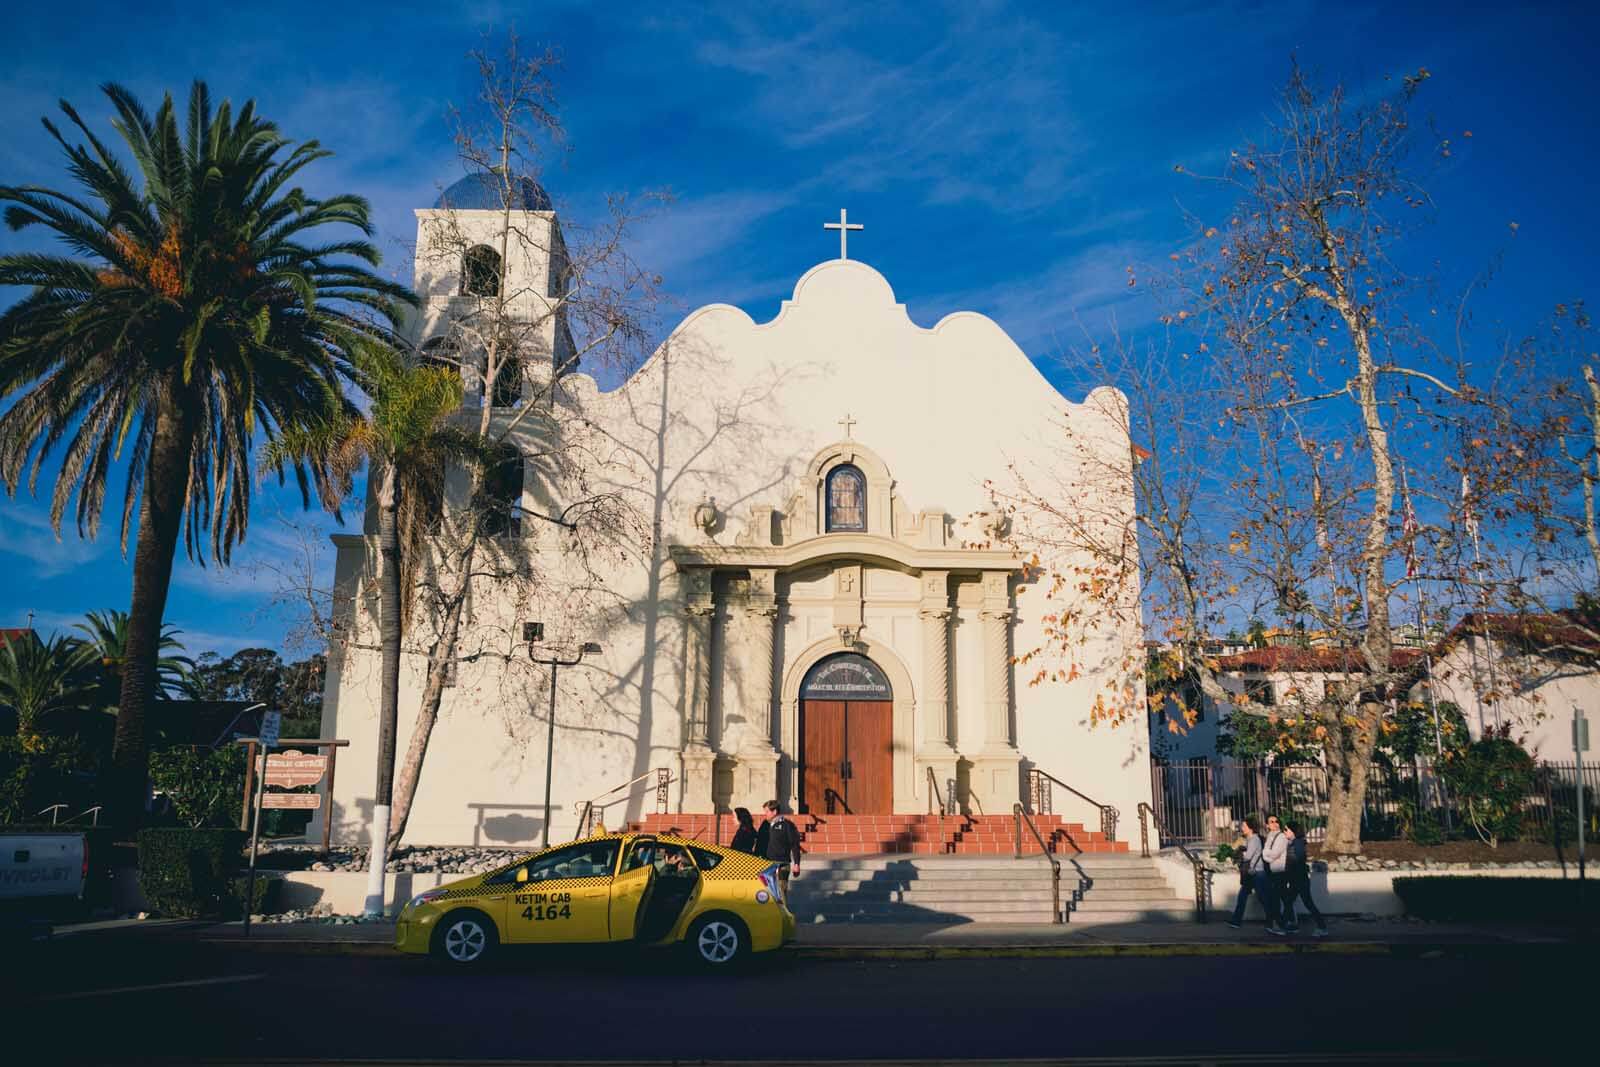 taxi outside of cathedral in Old Town San Diego